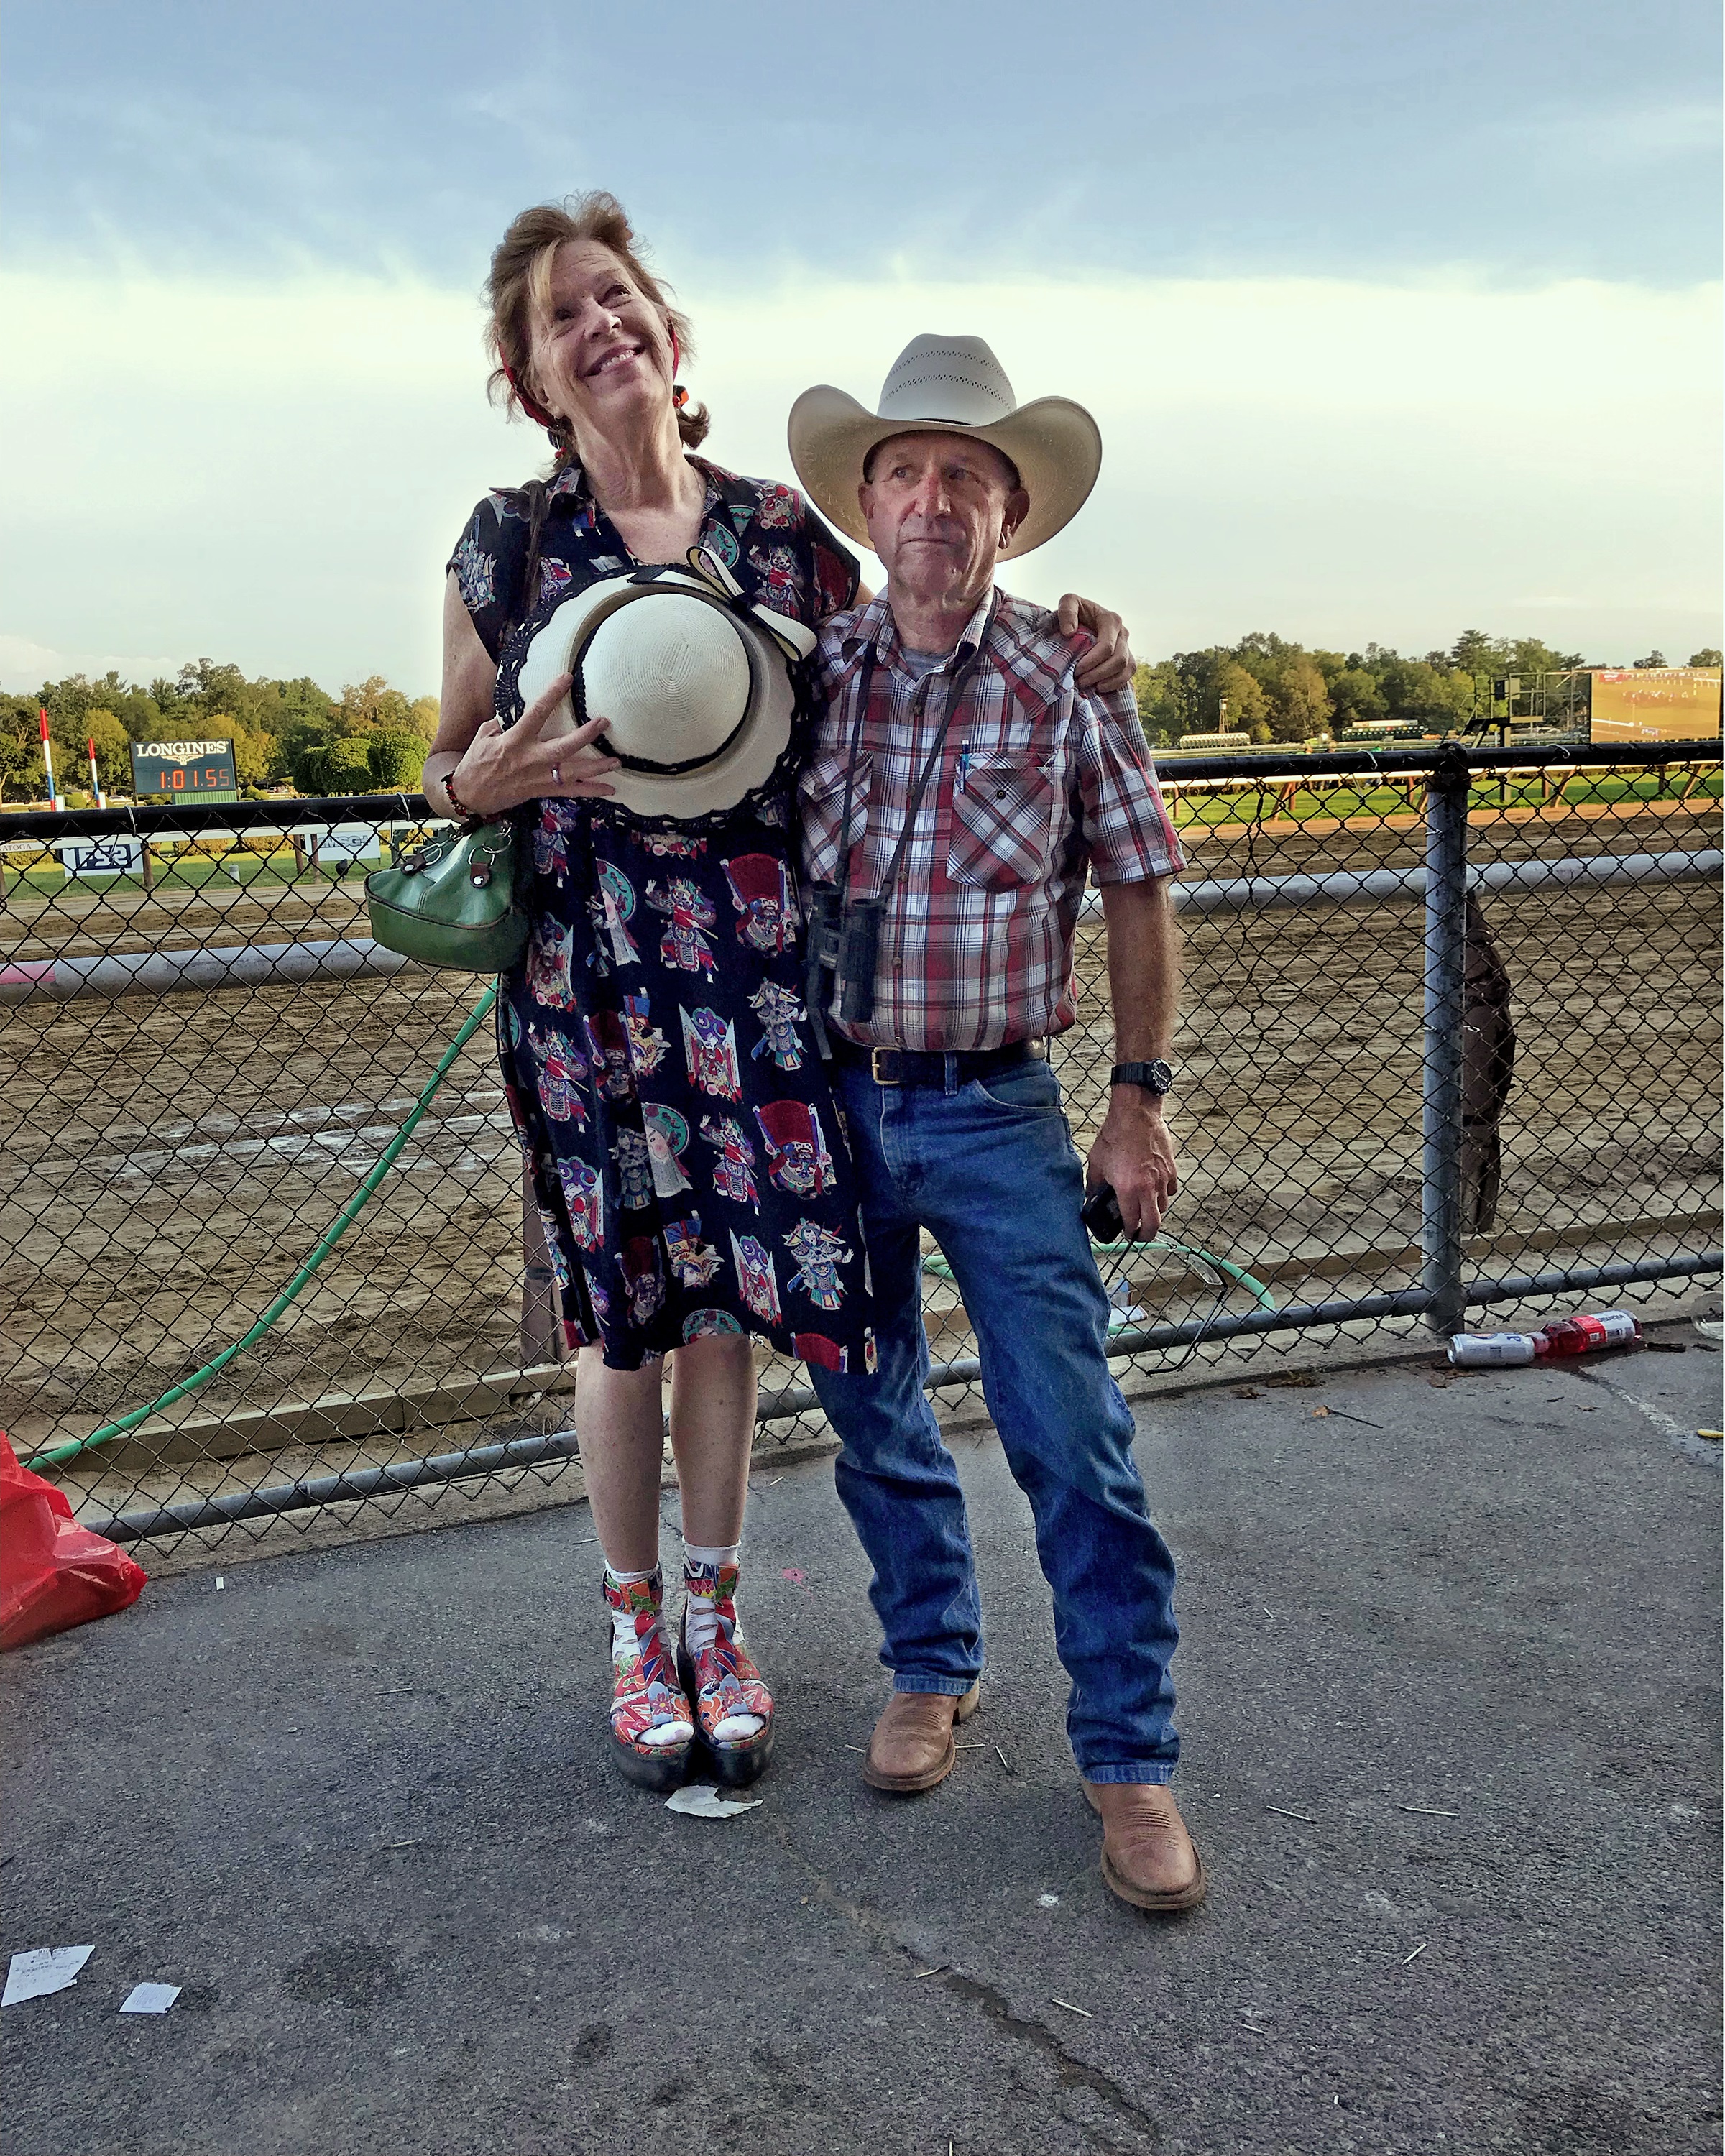 "Best Turned Out: Sally and John at the Whitney, August 2019 - August 3, 2019 - Saratoga Racetrack), Lorna Lentini